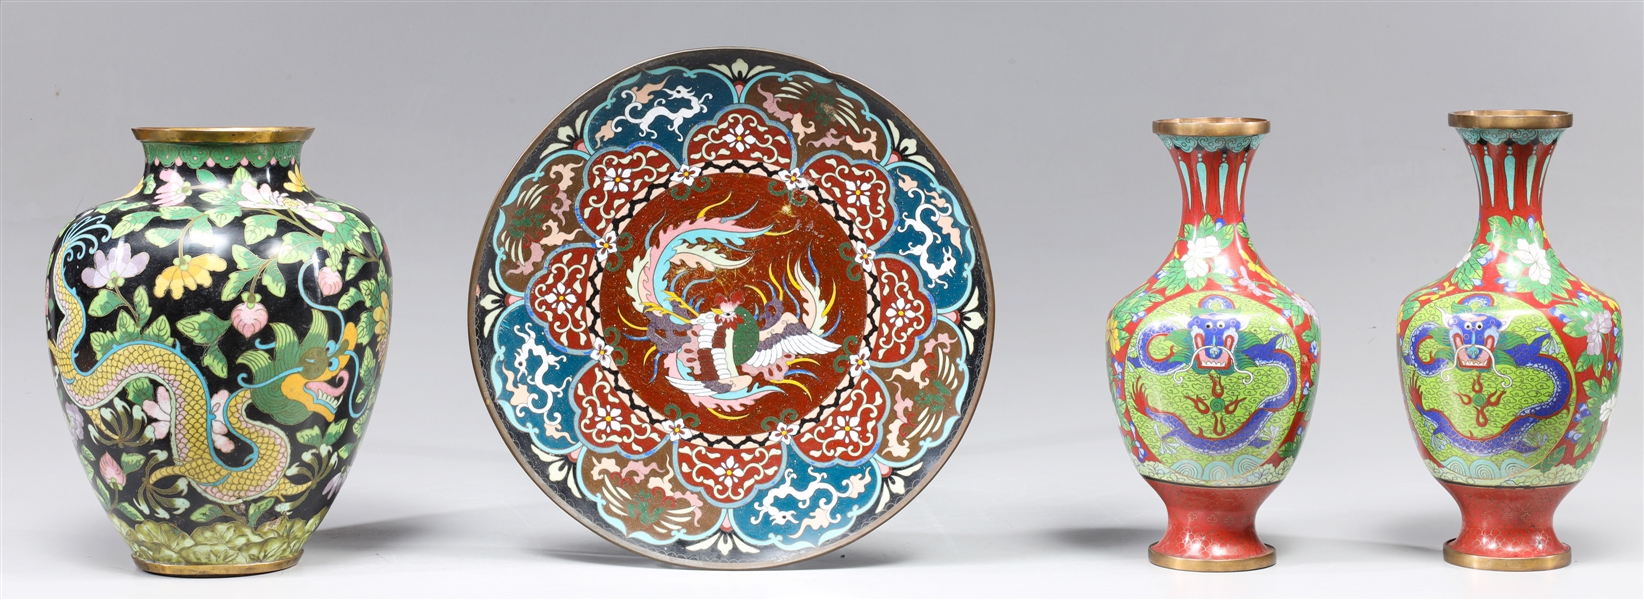 Group of four vintage Chinese cloisonné